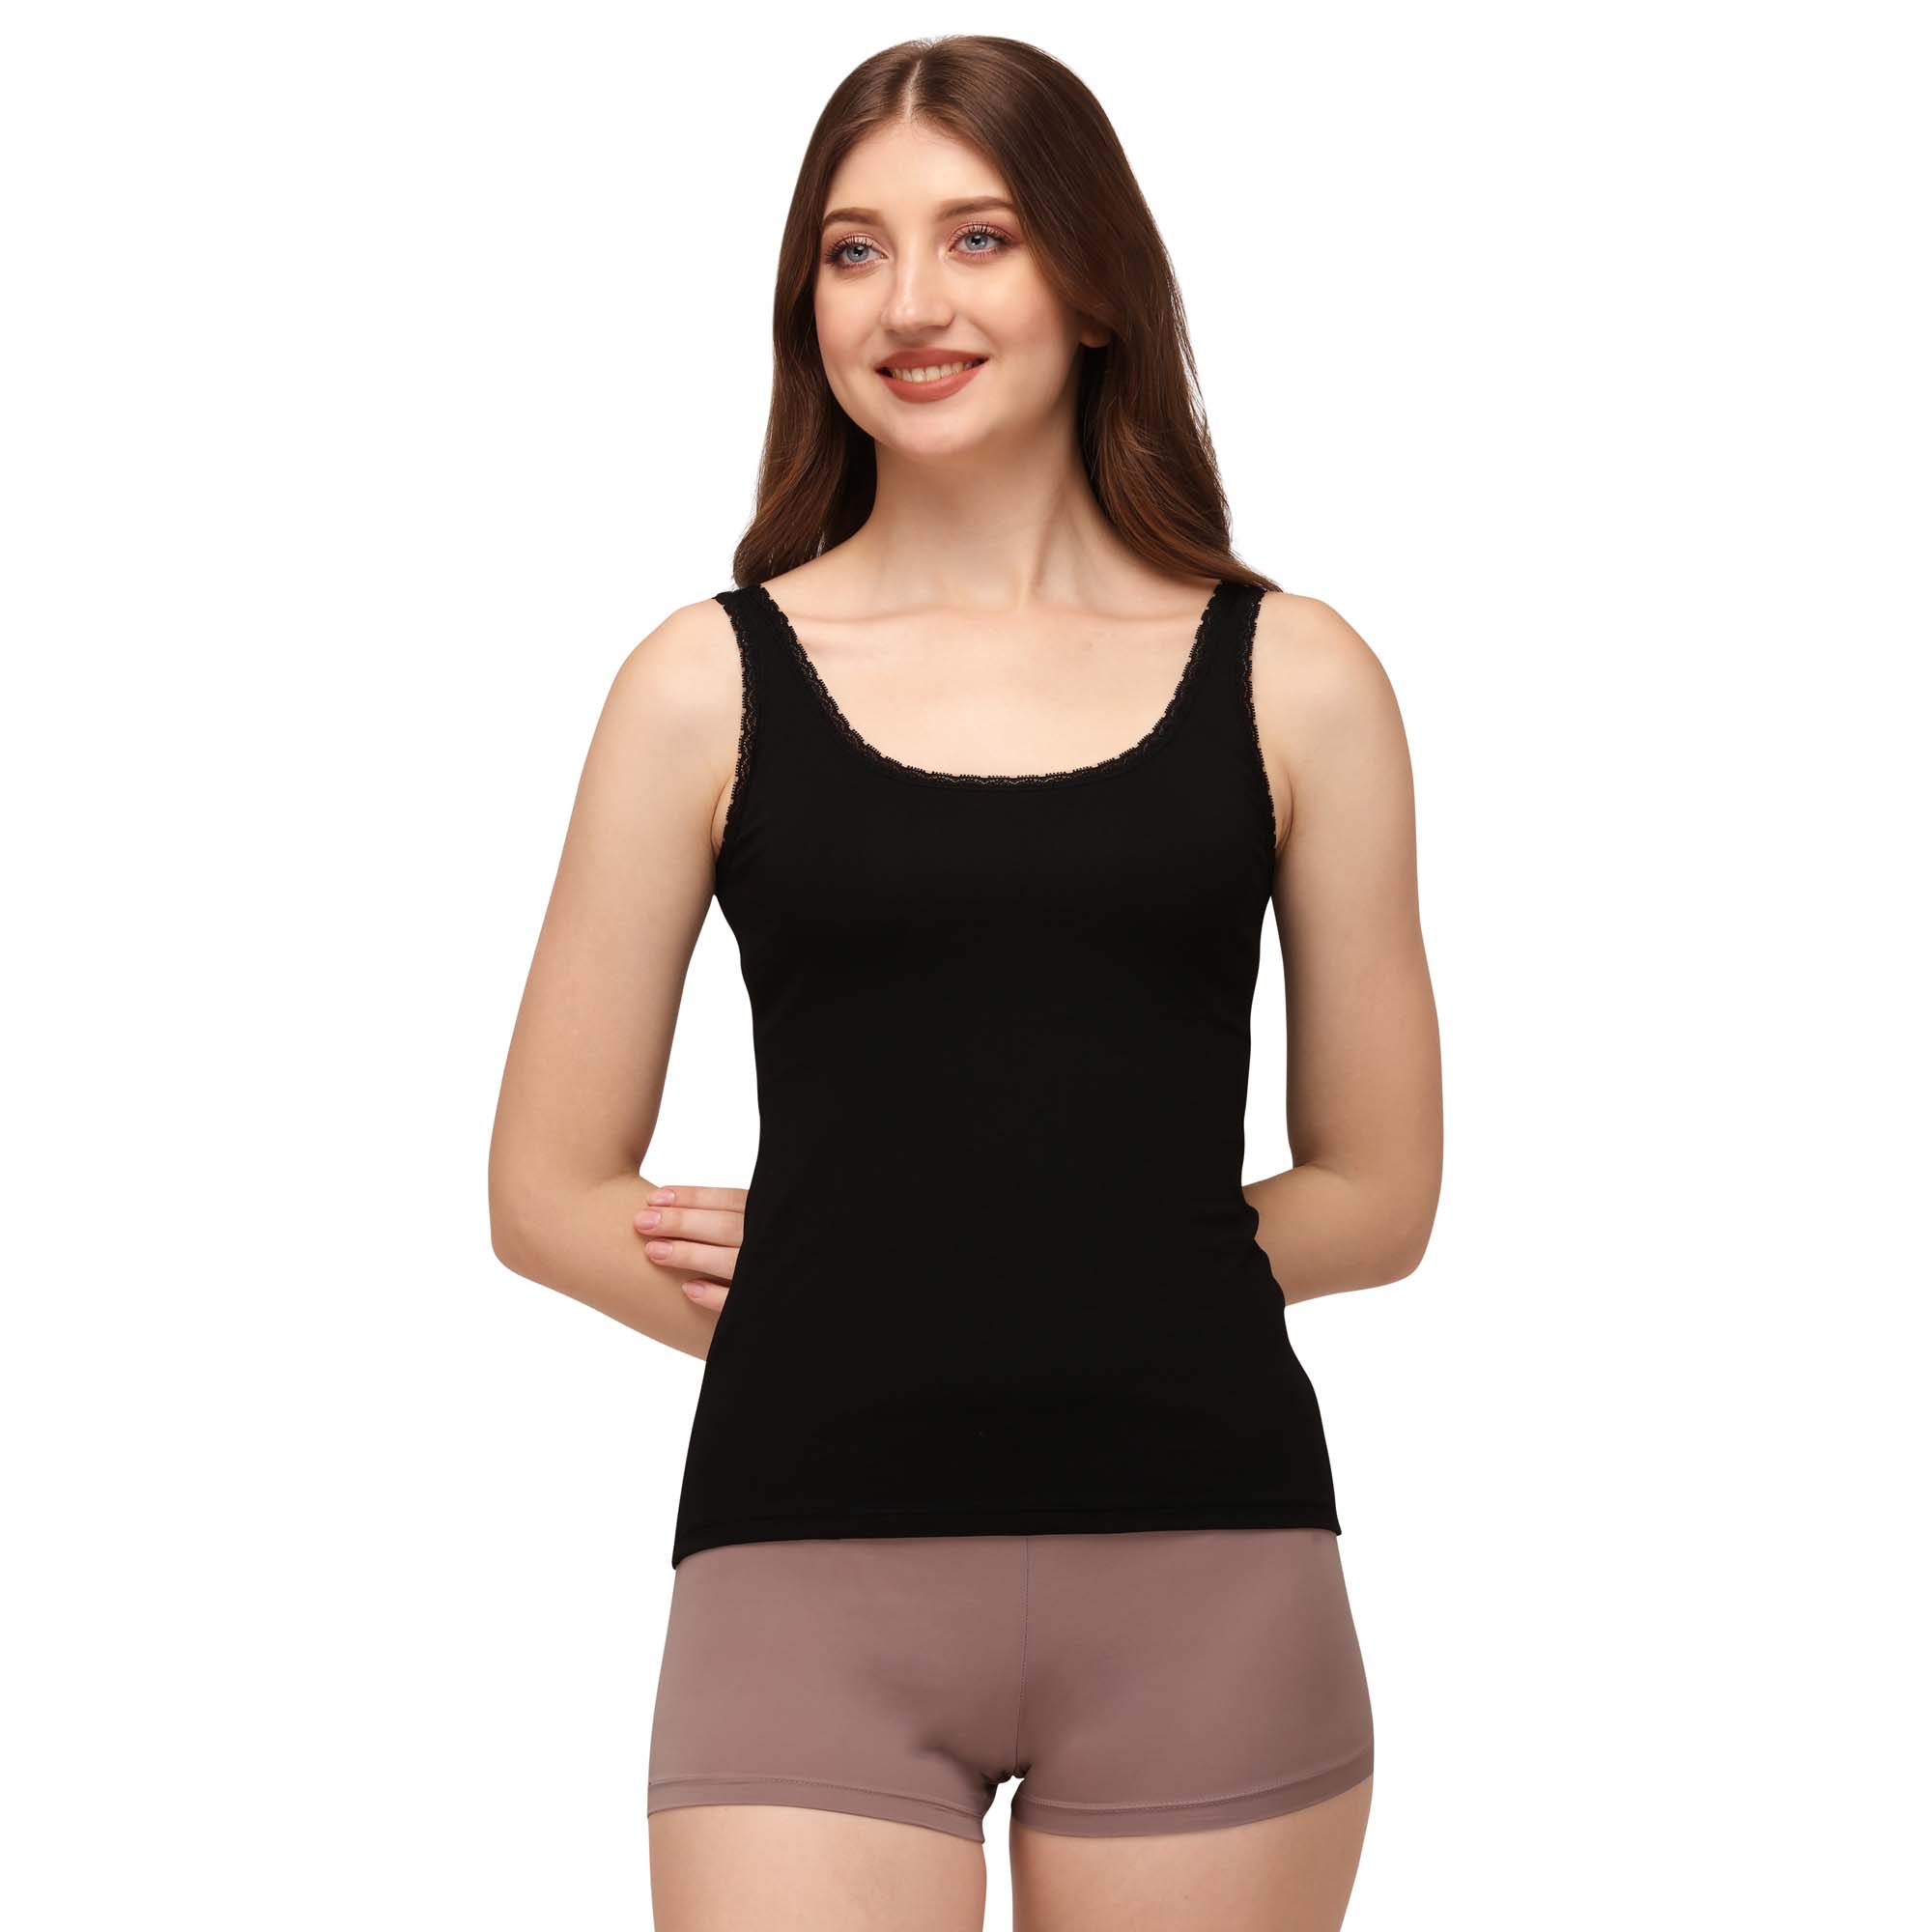 Summer 1819 Cotton Spandex Camisole Set No Steel Ring, Modal, Comfortable,  Seamless, Fashionable Womens Wrapped Top From Happyjany, $10.07